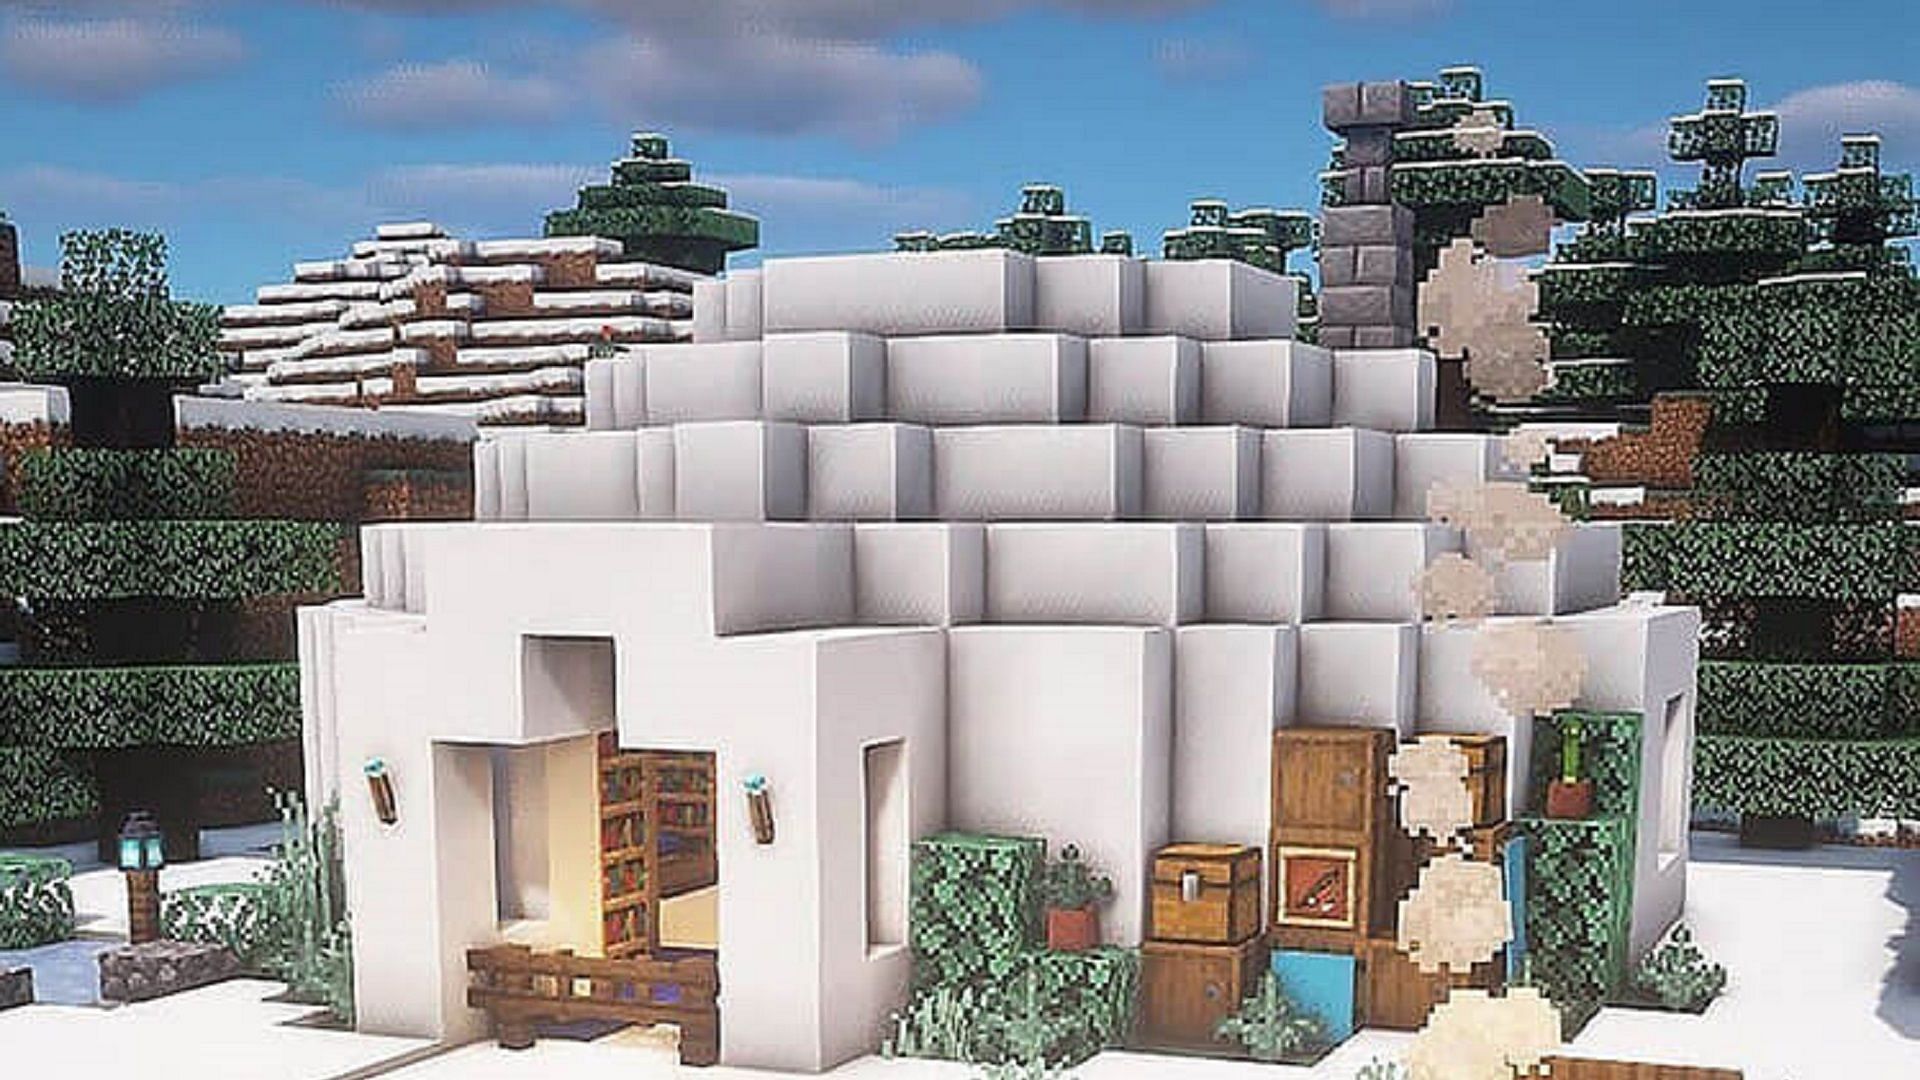 Improve on the base igloo design with this home (Image via Executivetree/Instagram)